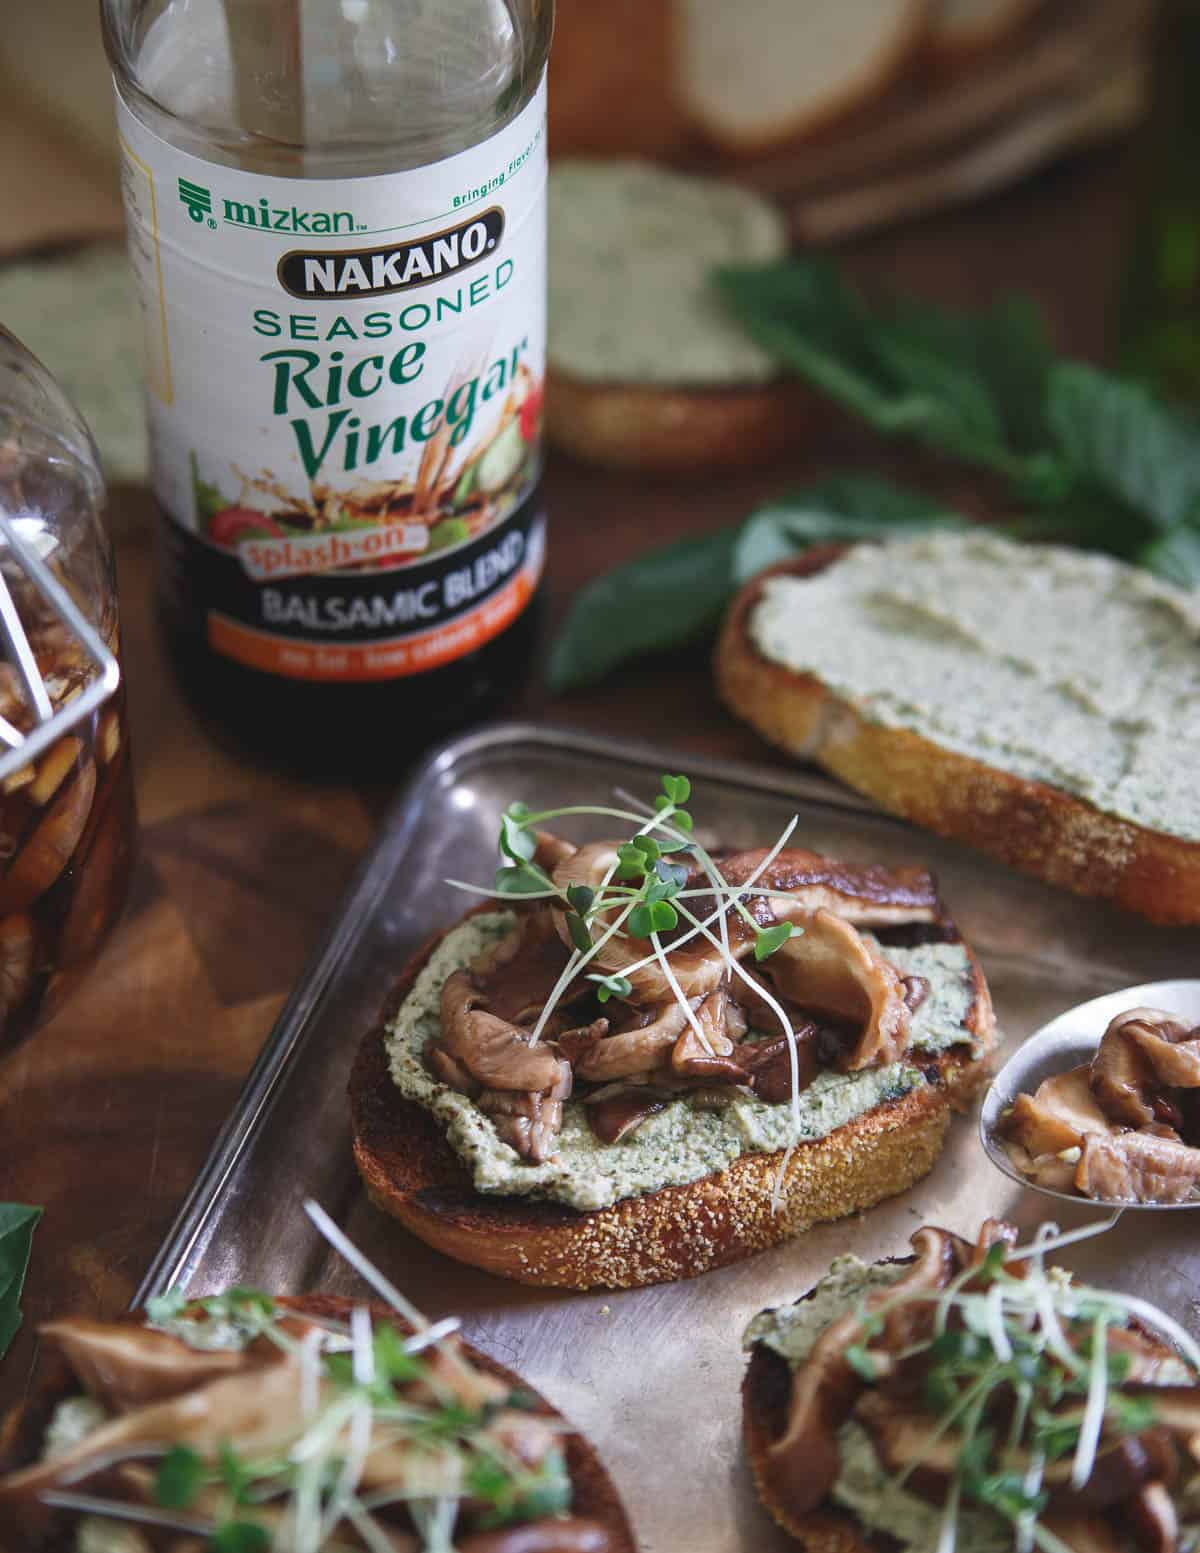 Balsamic Pickled Shiitake mushrooms are paired with a basil ricotta pesto spread for the perfect crostini bite.